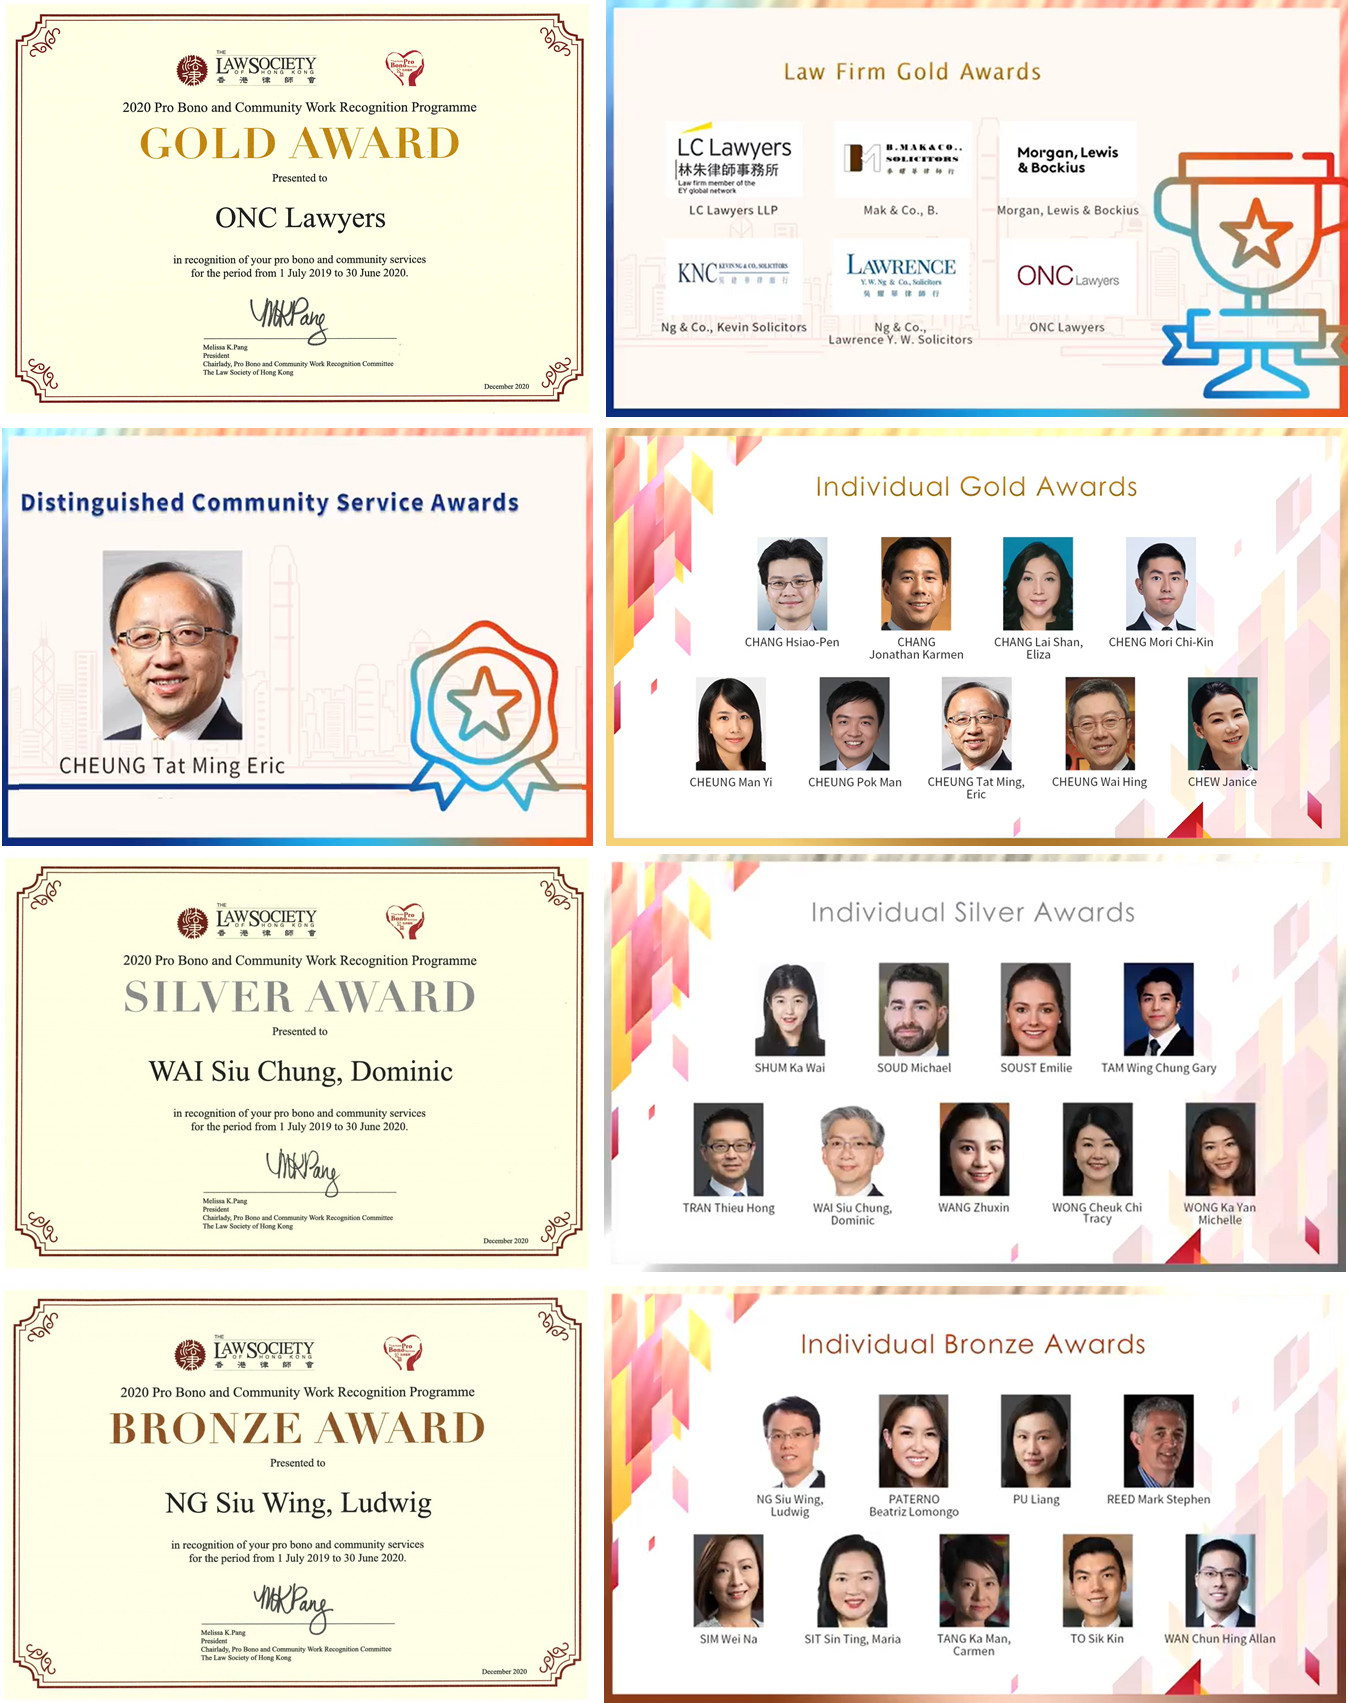 ONC Lawyers and our lawyers received awards in the 2020 Pro Bono and Community Work Recognition Programme